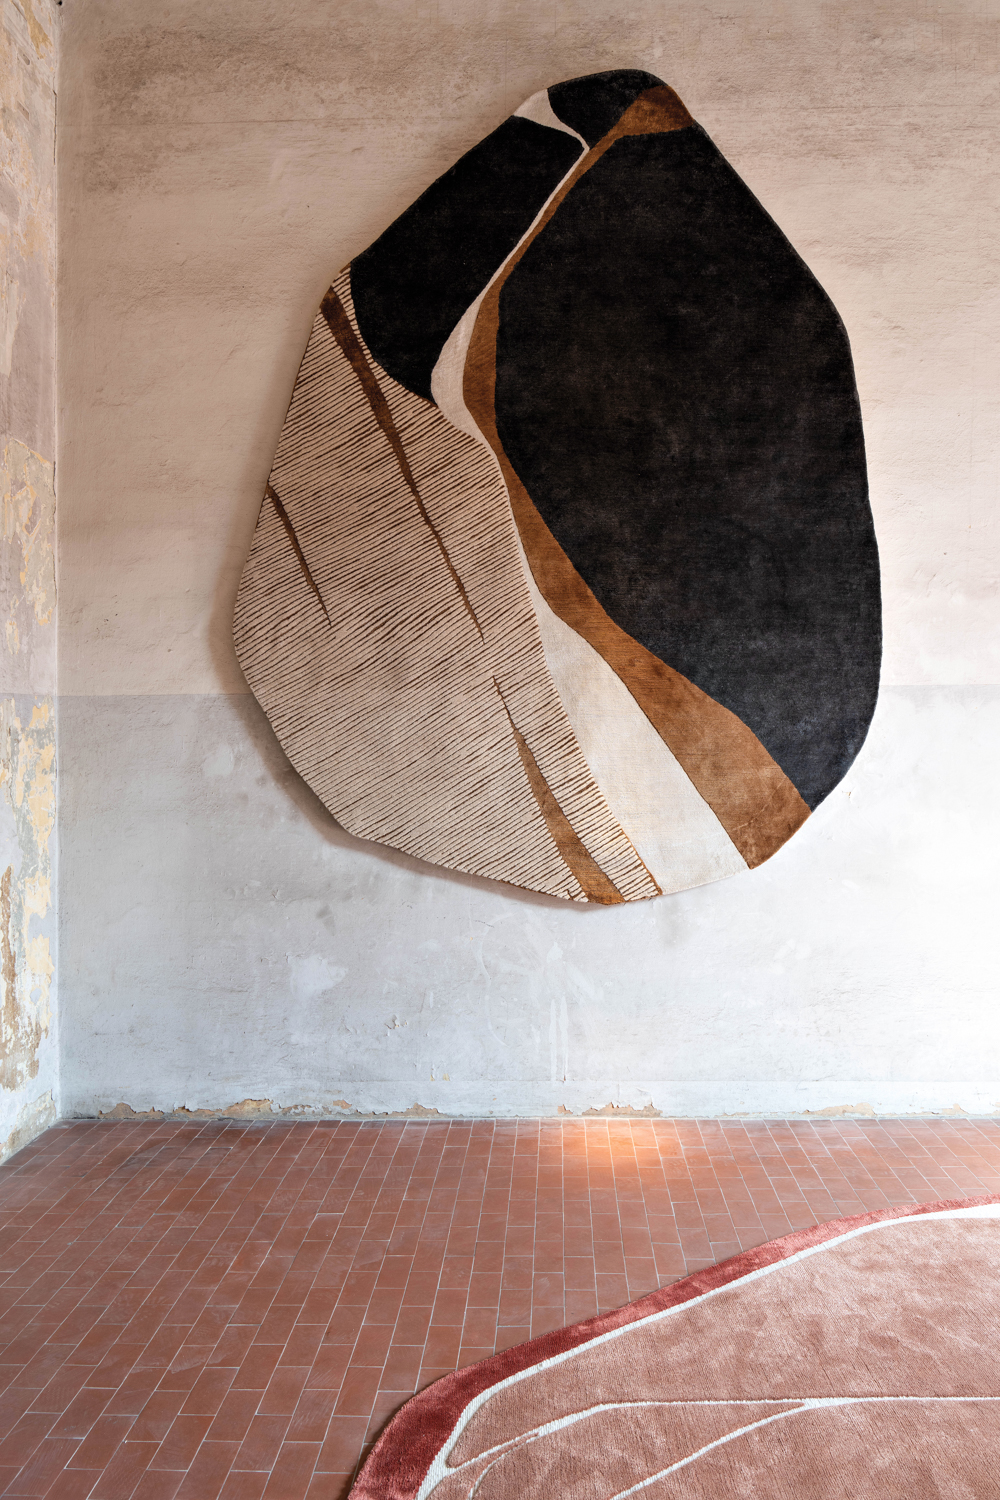 Black-, tan- and cream-colored circular-shaped rug hangs on blank wall above brick-lined floor